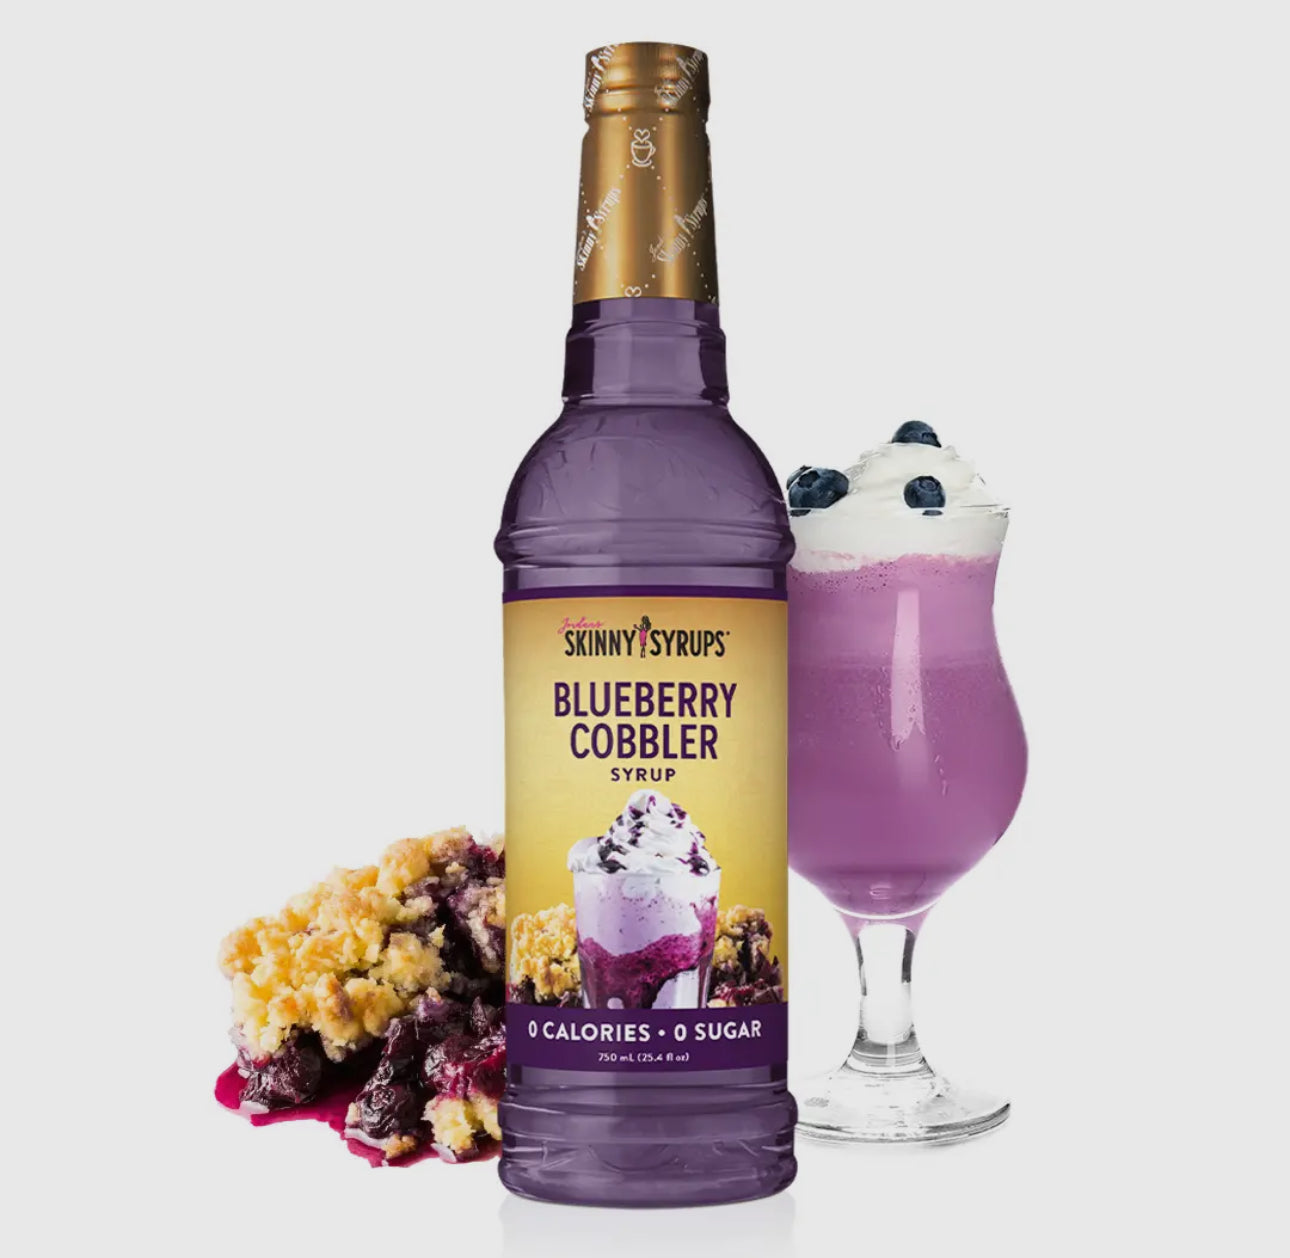 Skinny Mix Sugar Free Blueberry Cobbler Syrup